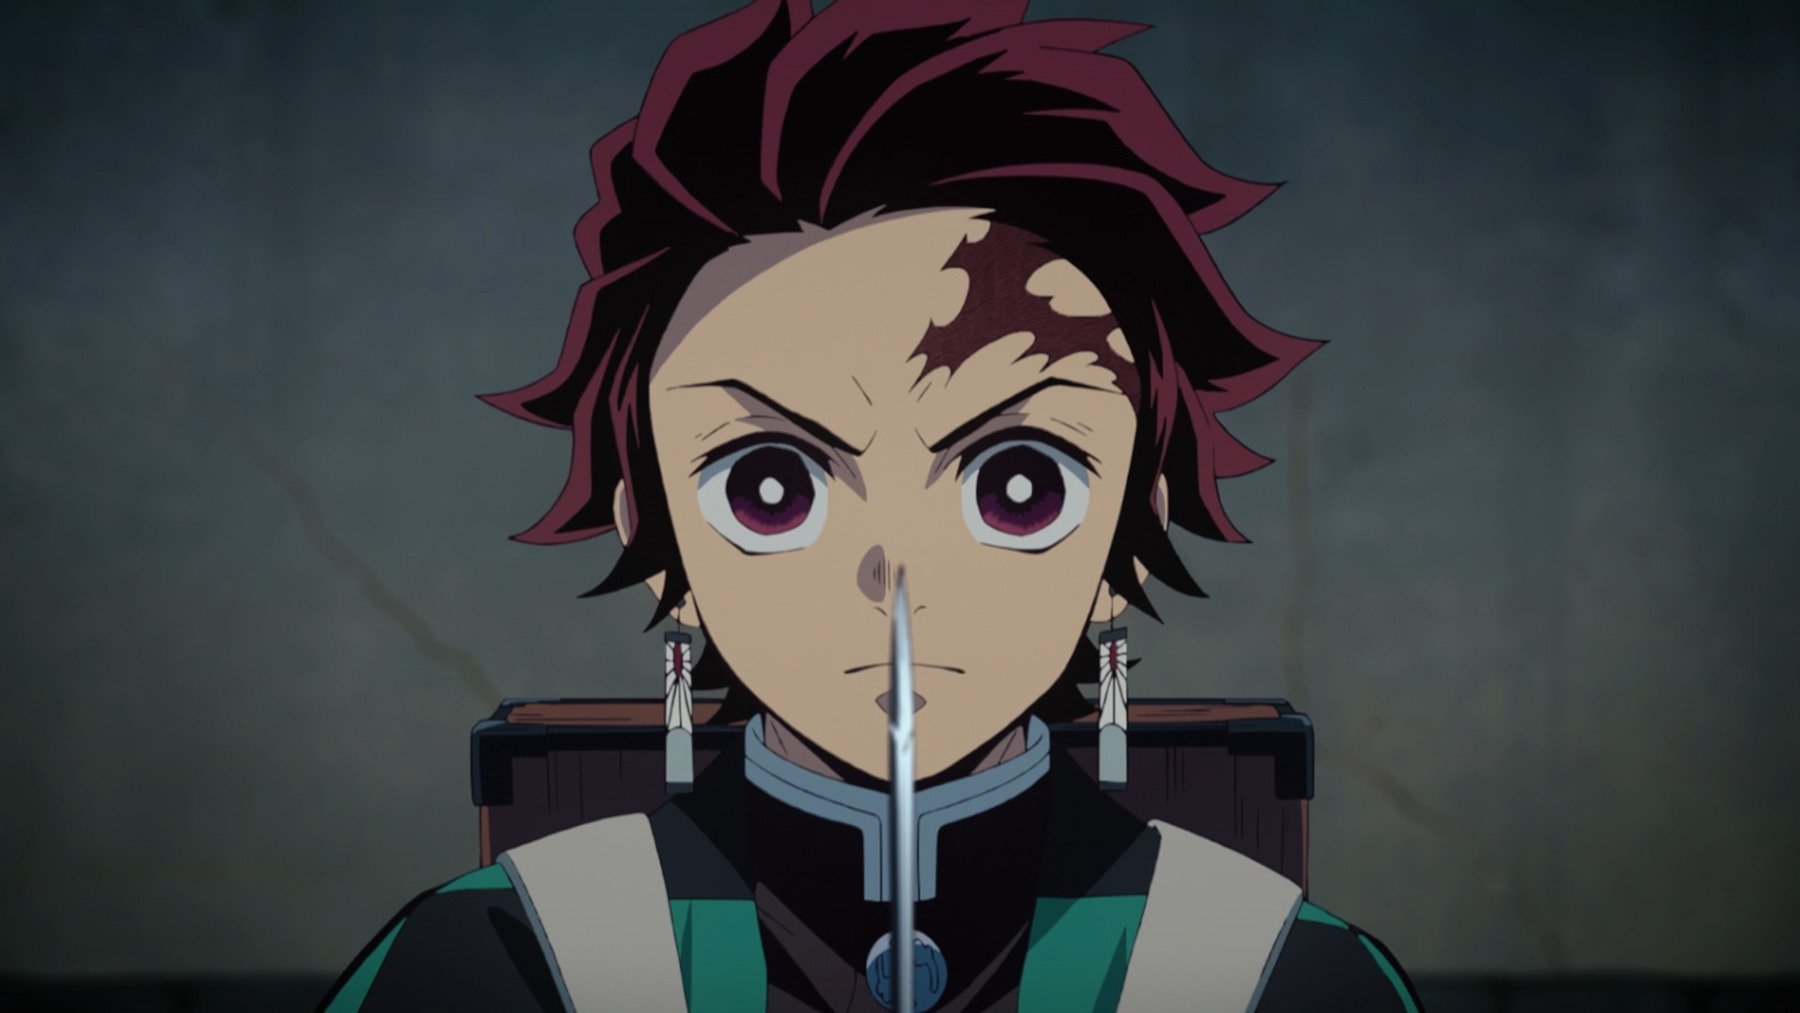 Demon Slayer S2 ep 11 release time confirmed with extended runtime